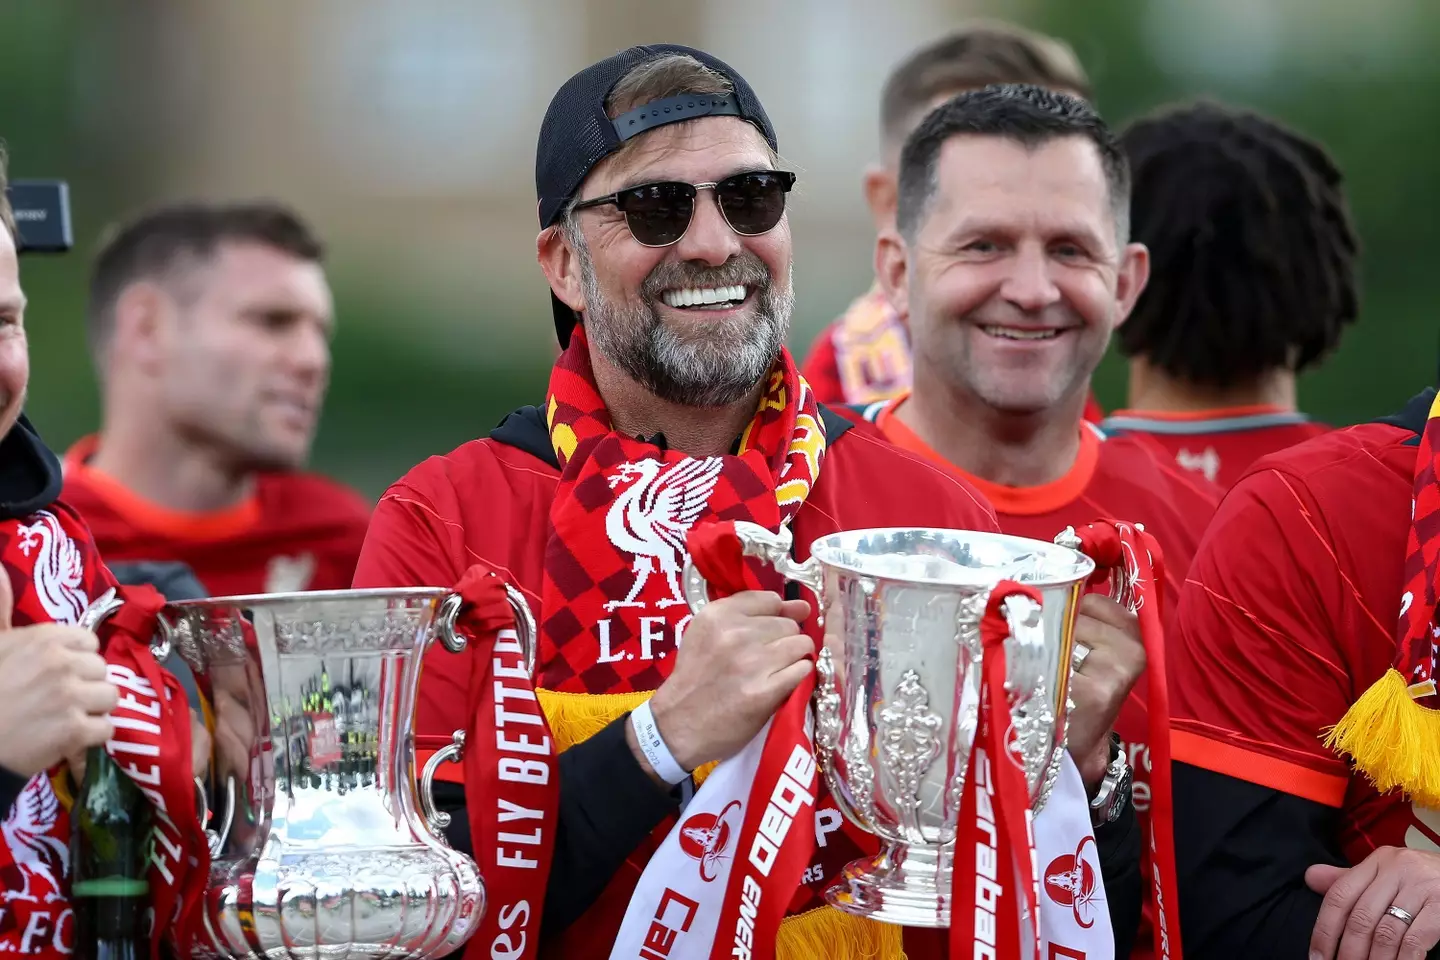 Klopp has gone on to win numerous trophies with Liverpool (Image: Alamy)